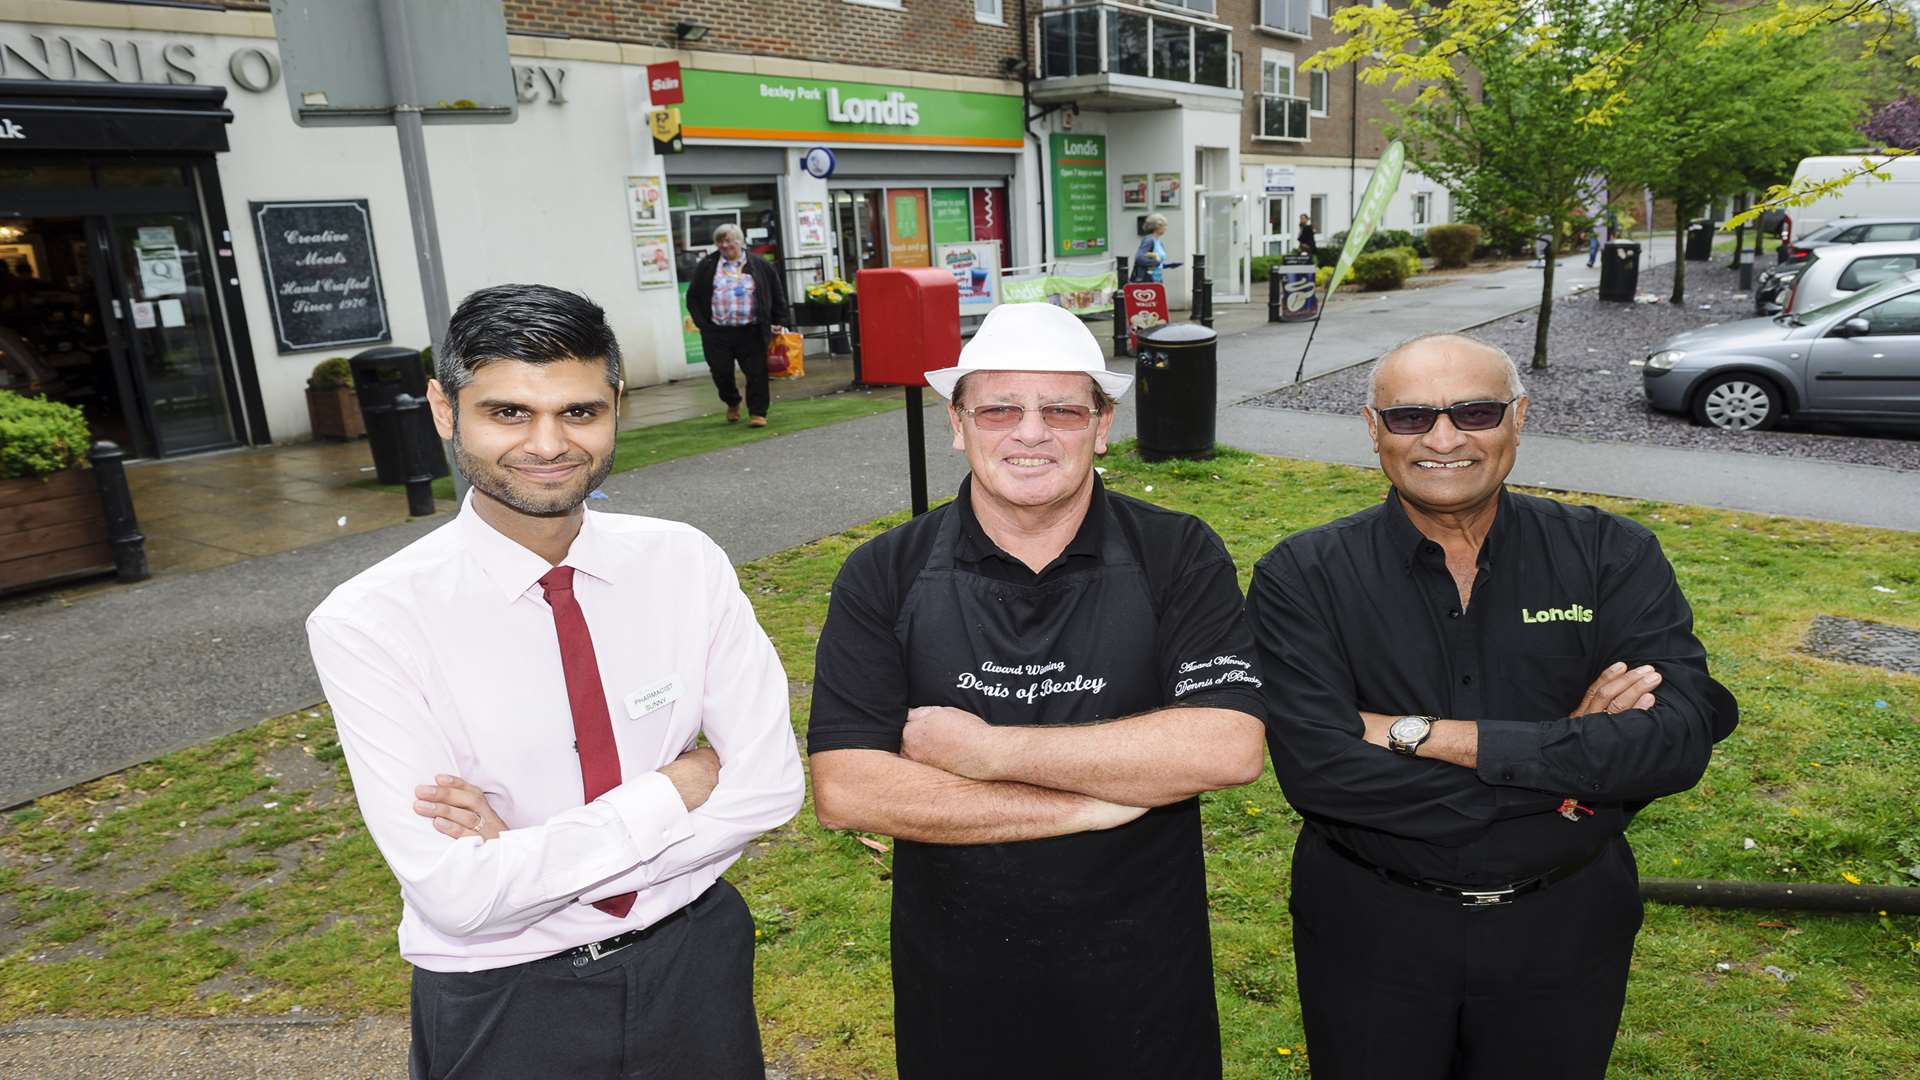 Sunny Chandarana, of McQueen's Pharmacy, Keith Mulford of butchers Dennis of Bexley and Kiran Patel of Bexley Park Londis